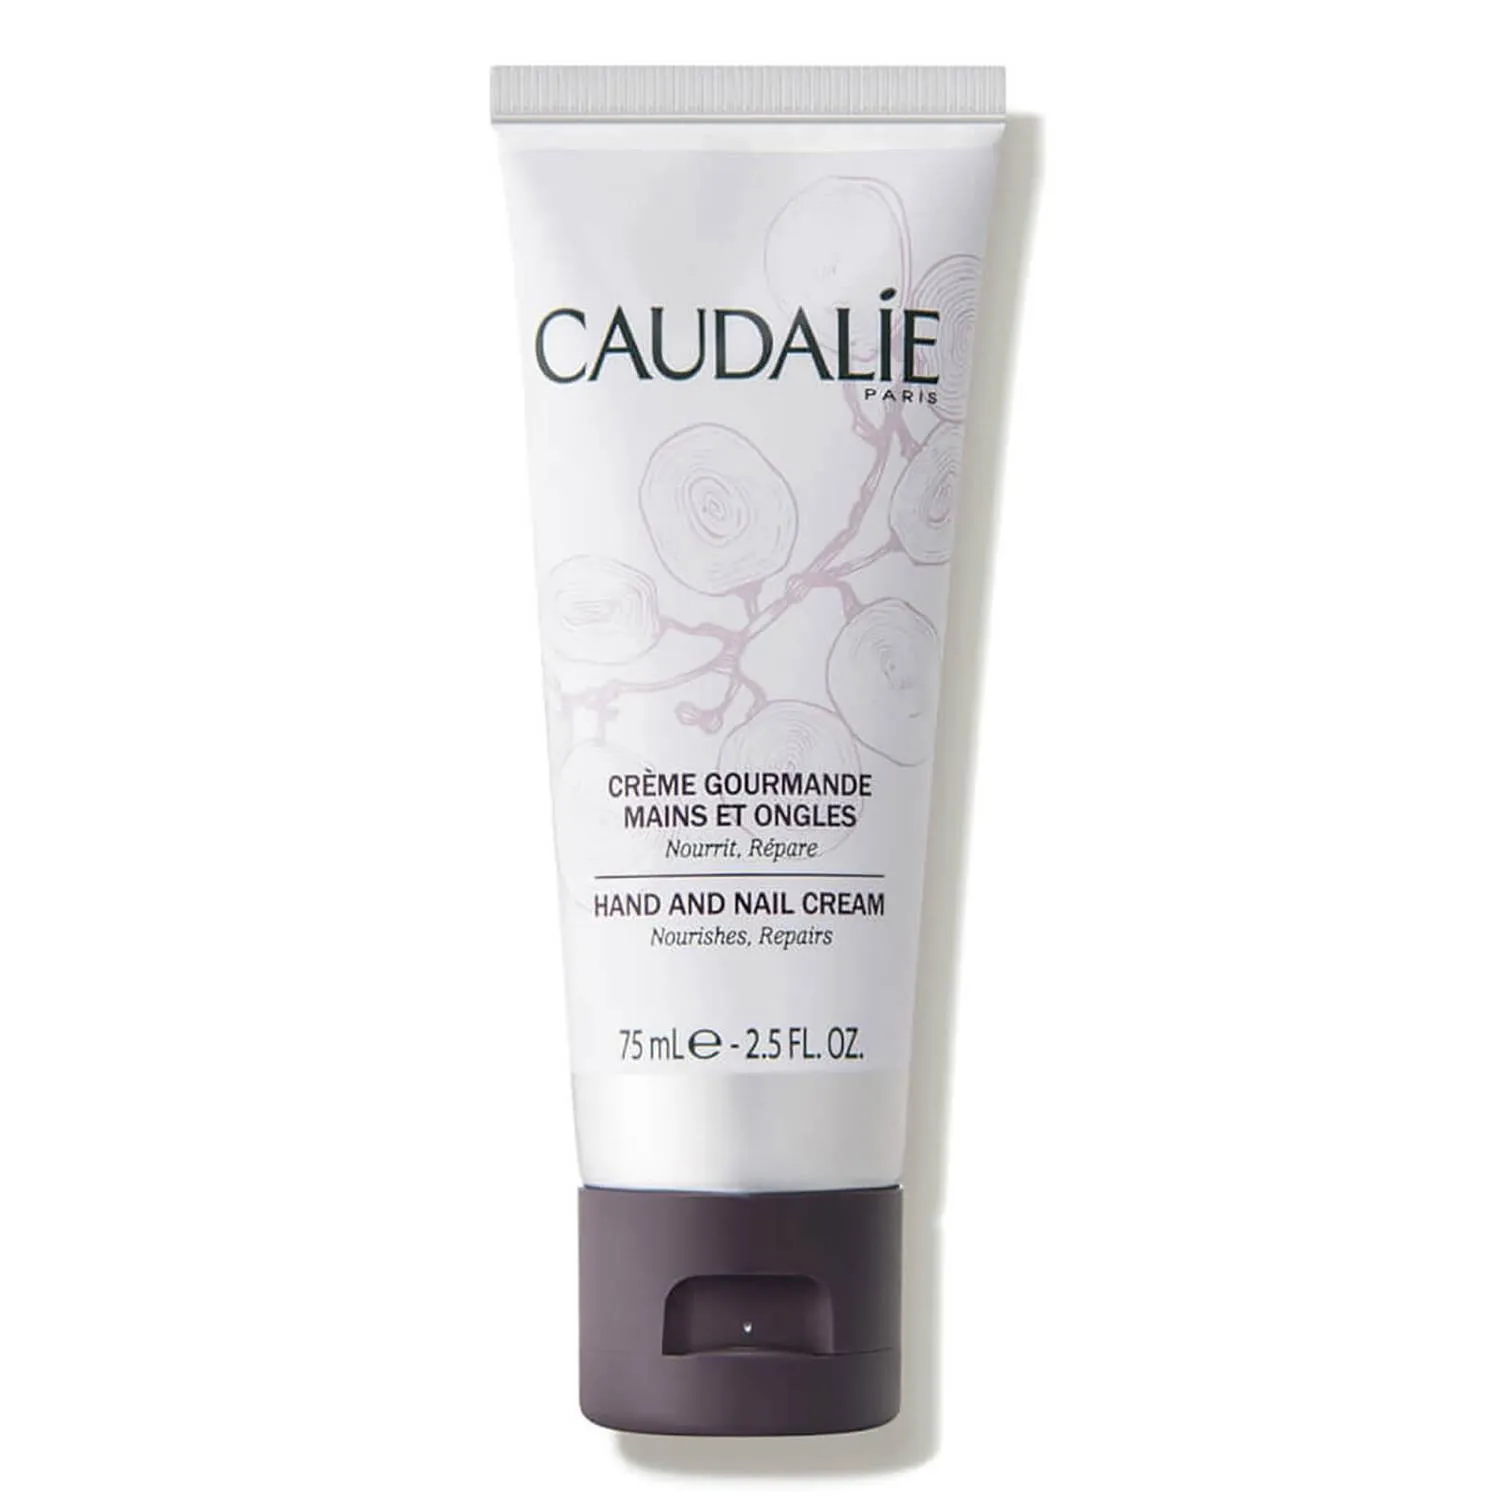 Nourishing and Protective Hand and Nail Cream by Caudalie, one of the best Caudalie products.